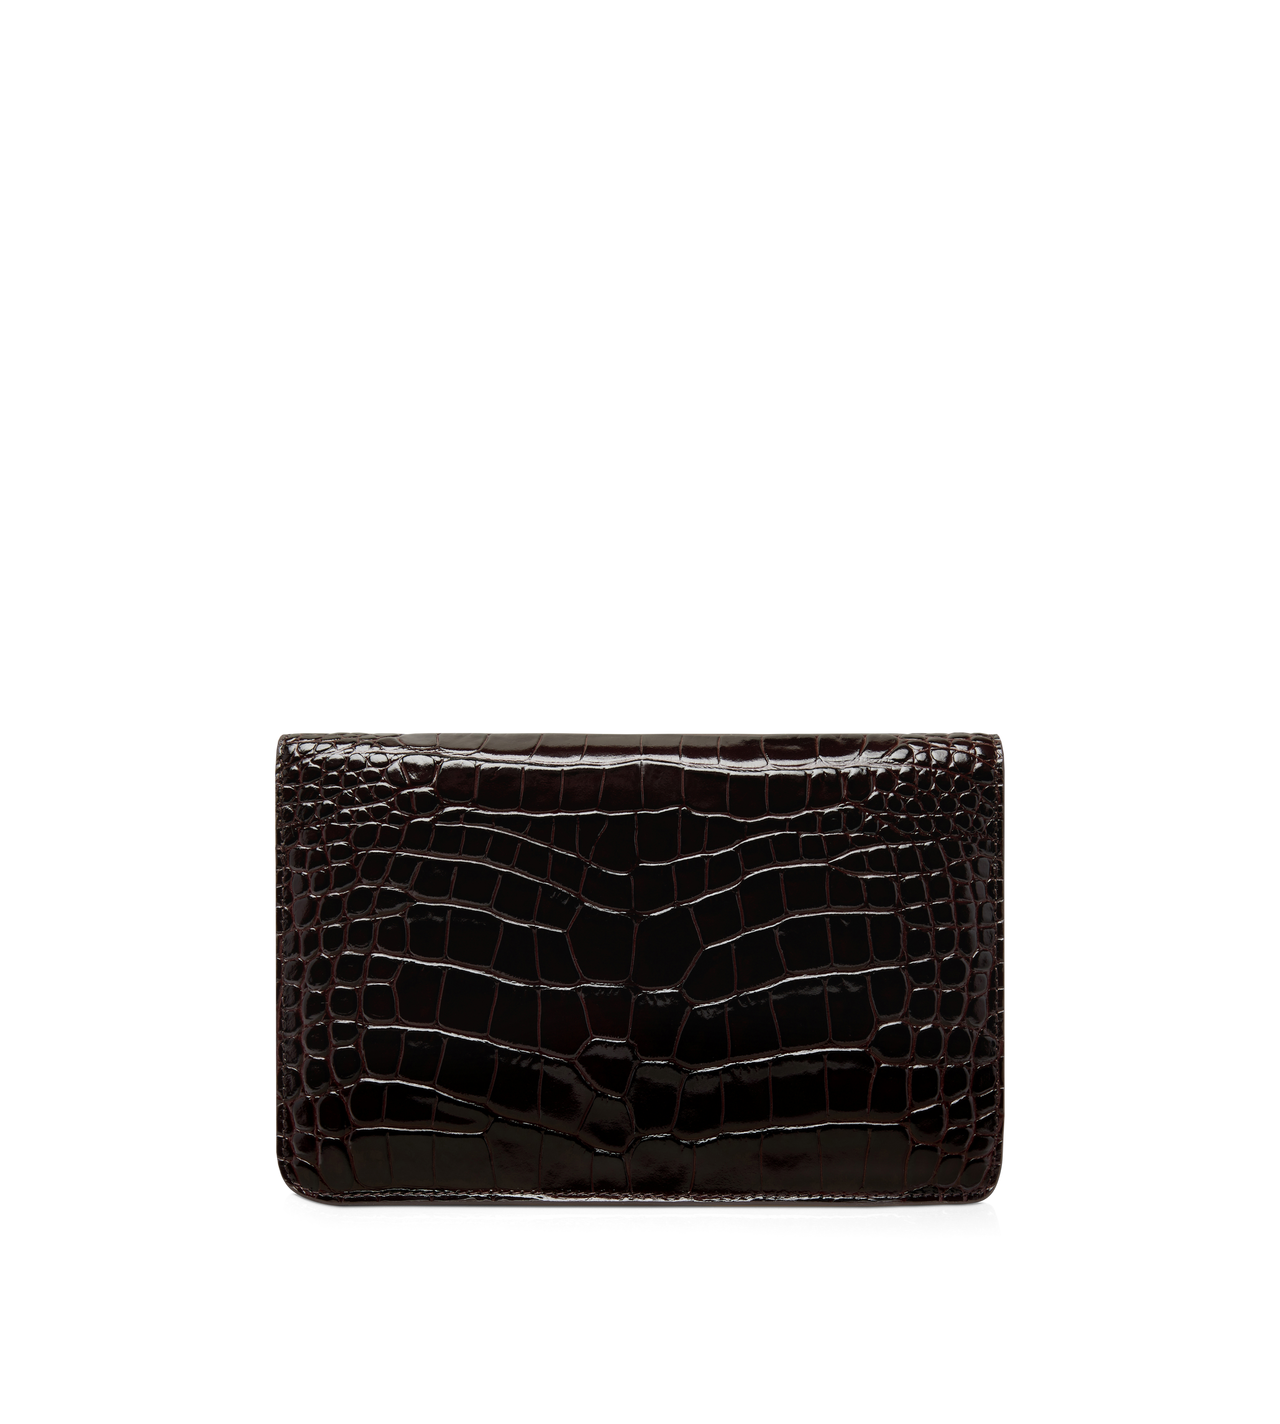 STAMPED CROCODILE LEATHER WHITNEY SMALL SHOULDER BAG